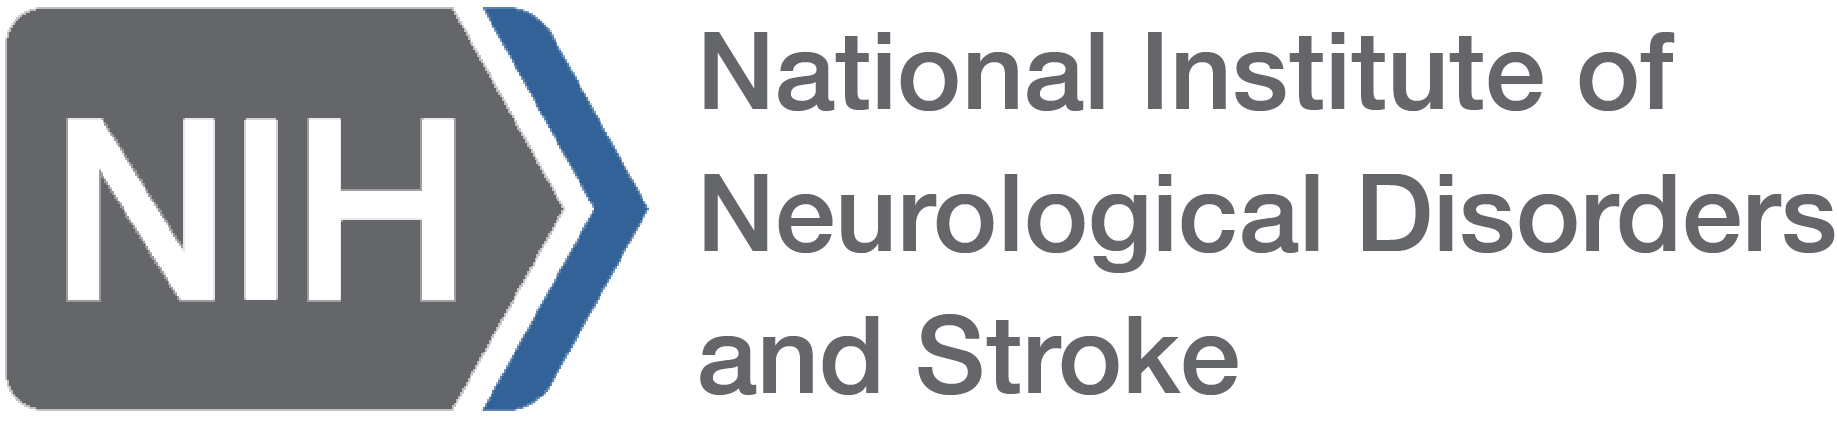 Home | National Institute of Neurological Disorders and Stroke